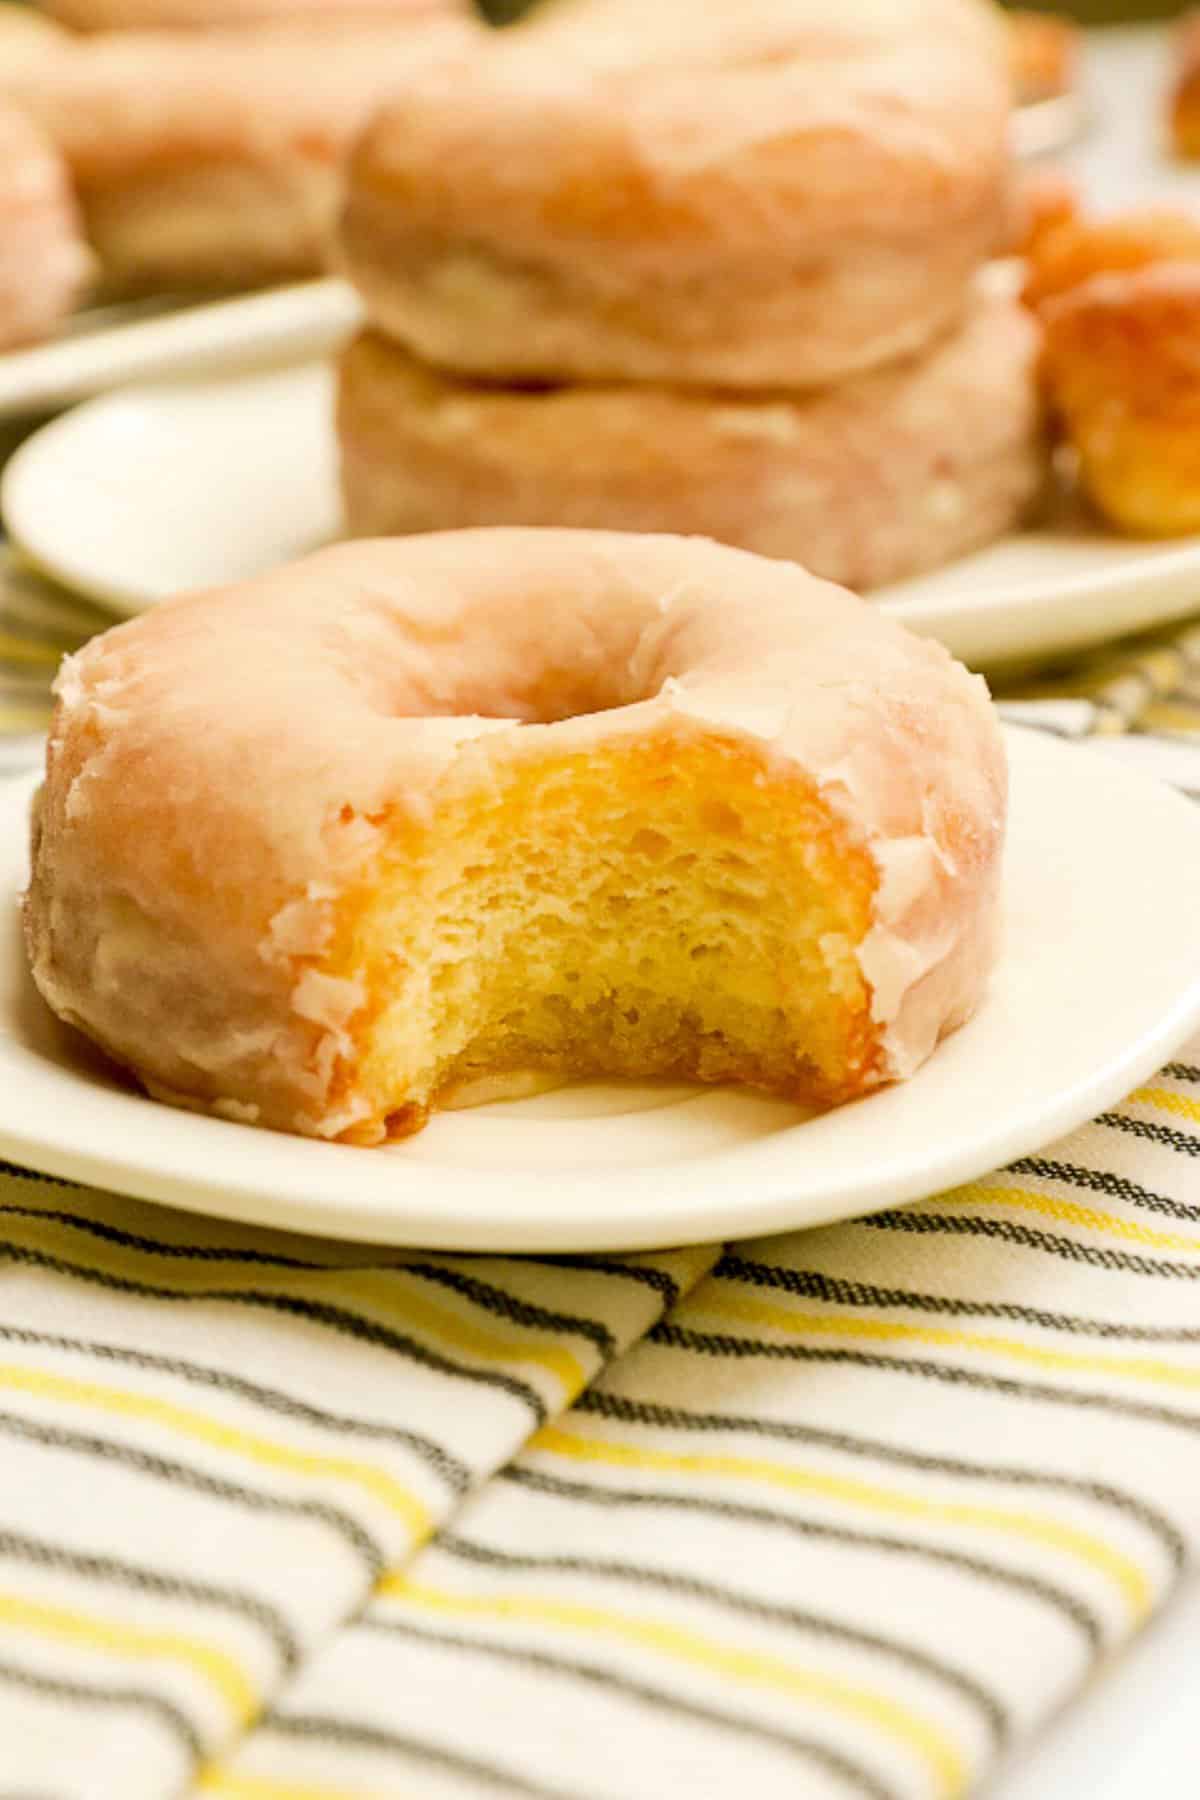 Enjoy biting into pure deliciousness with a homemade glazed donut